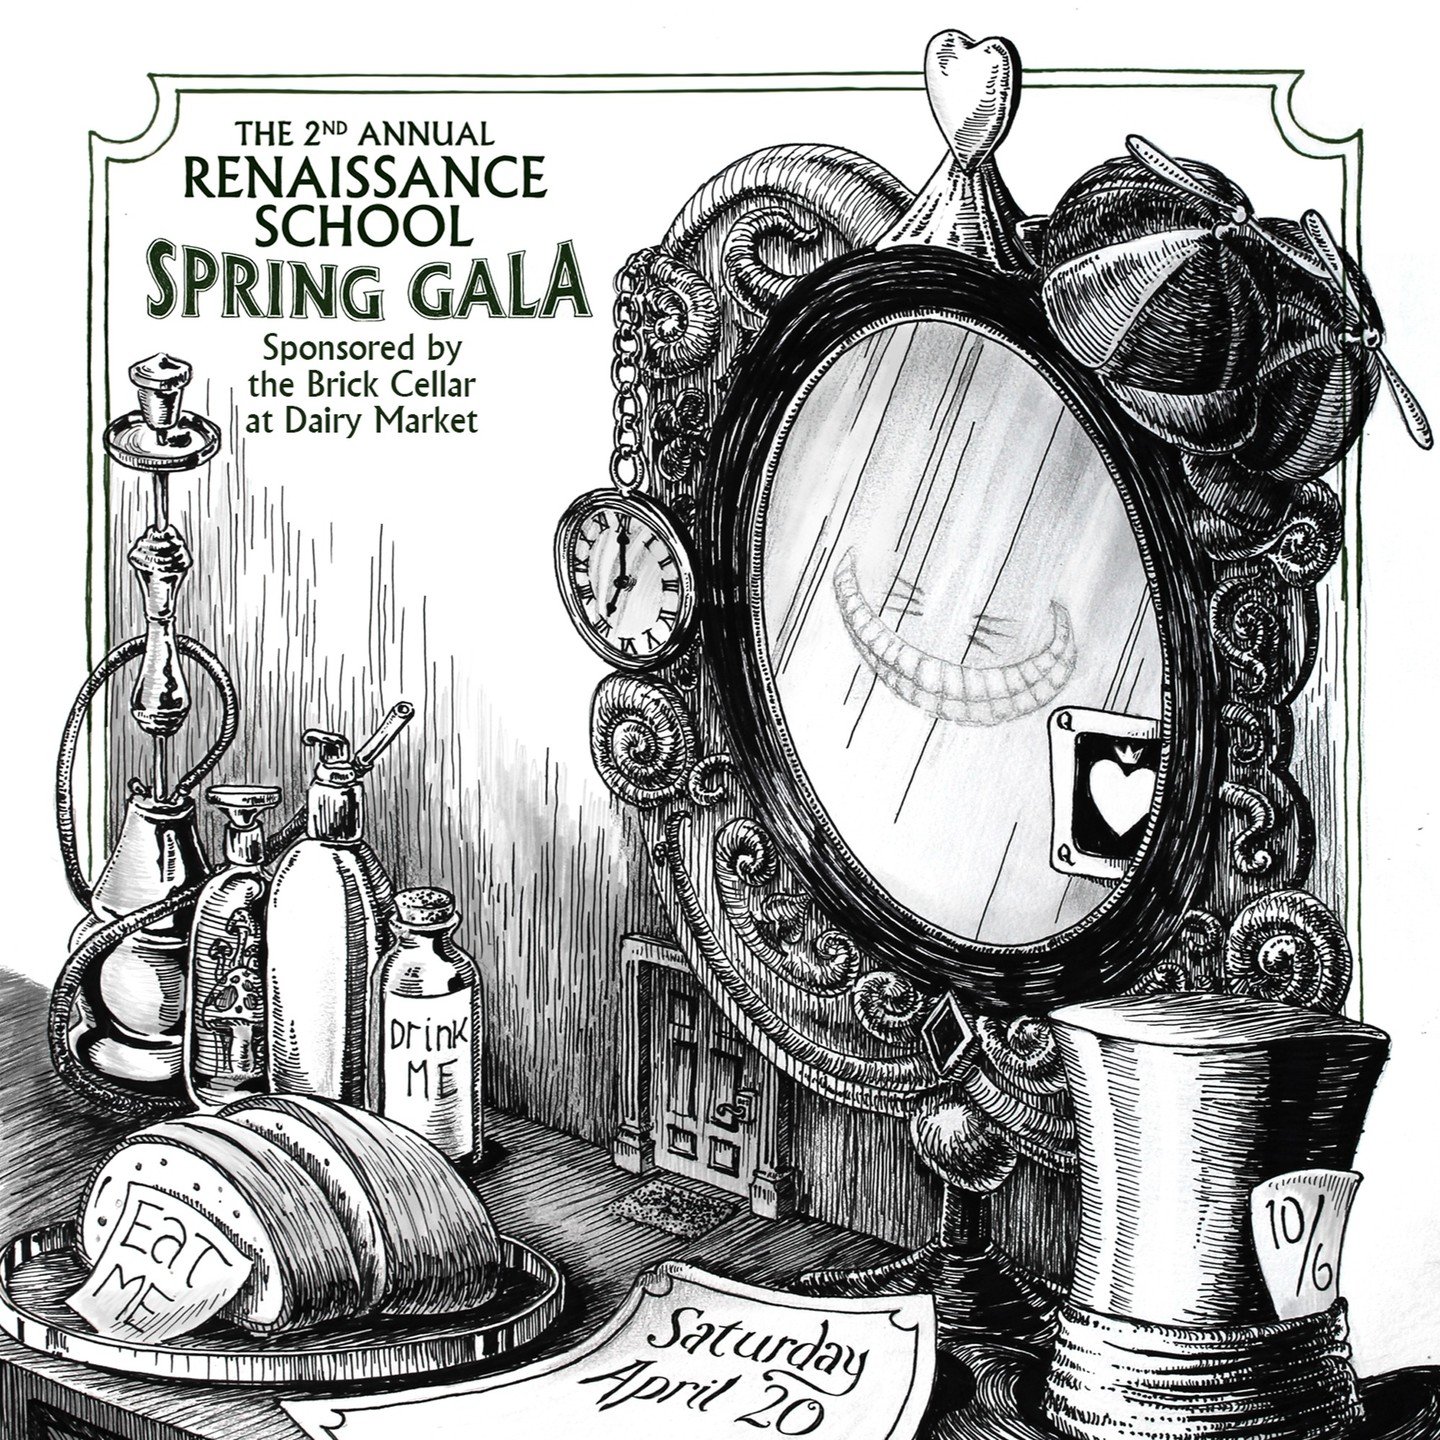 Here is the final event poster for the @renschool Spring Gala! It is a great event centered on raising money for a great school and hanging with some very cool people. There will also be some great art by incredible Renaissance School Artists availab